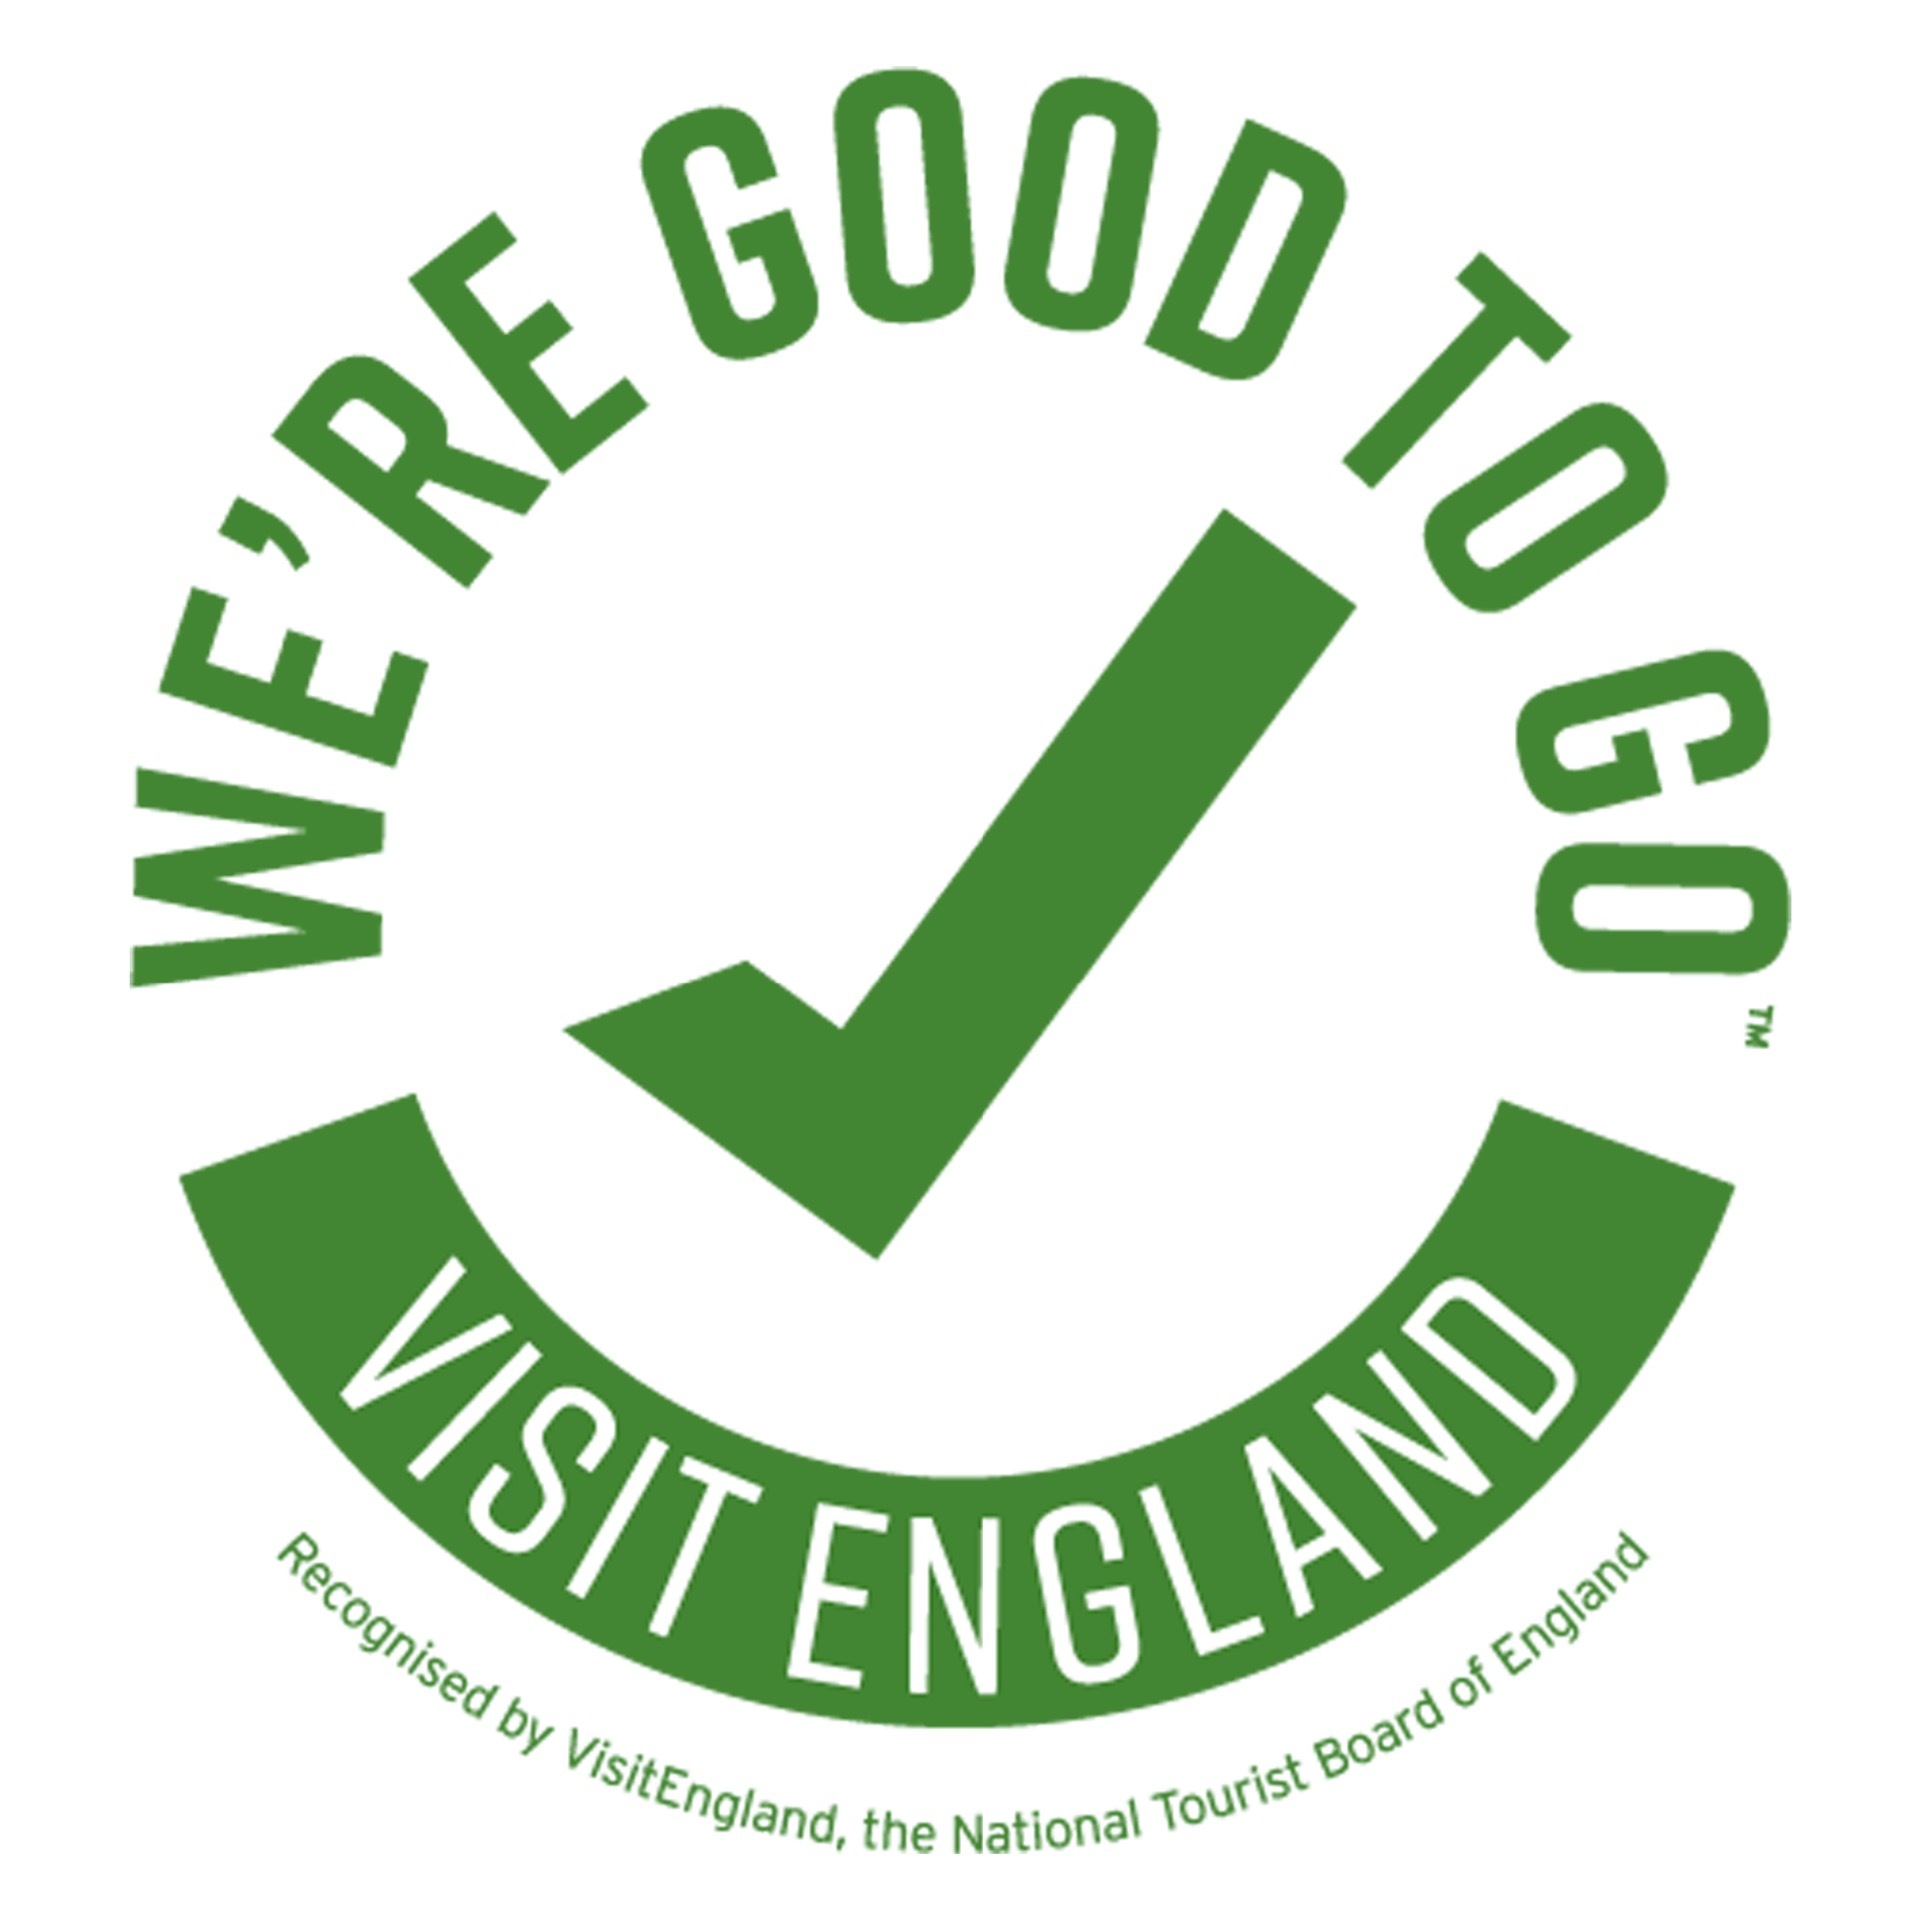 We're Good To Go - Visit England Badge